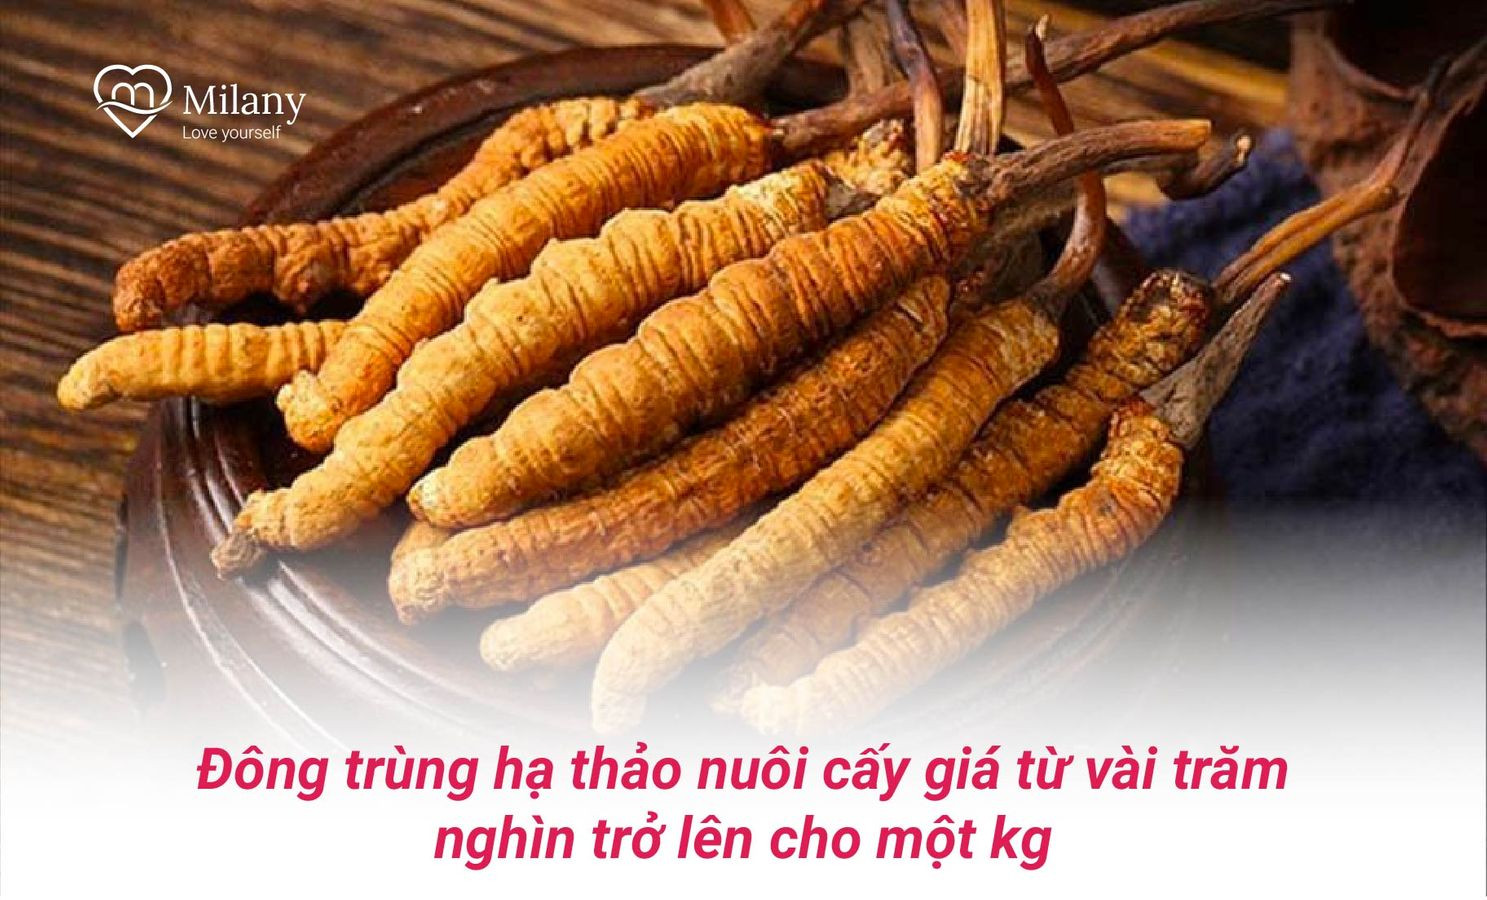 gia-dong-trung-ha-thao-nuoi-cay